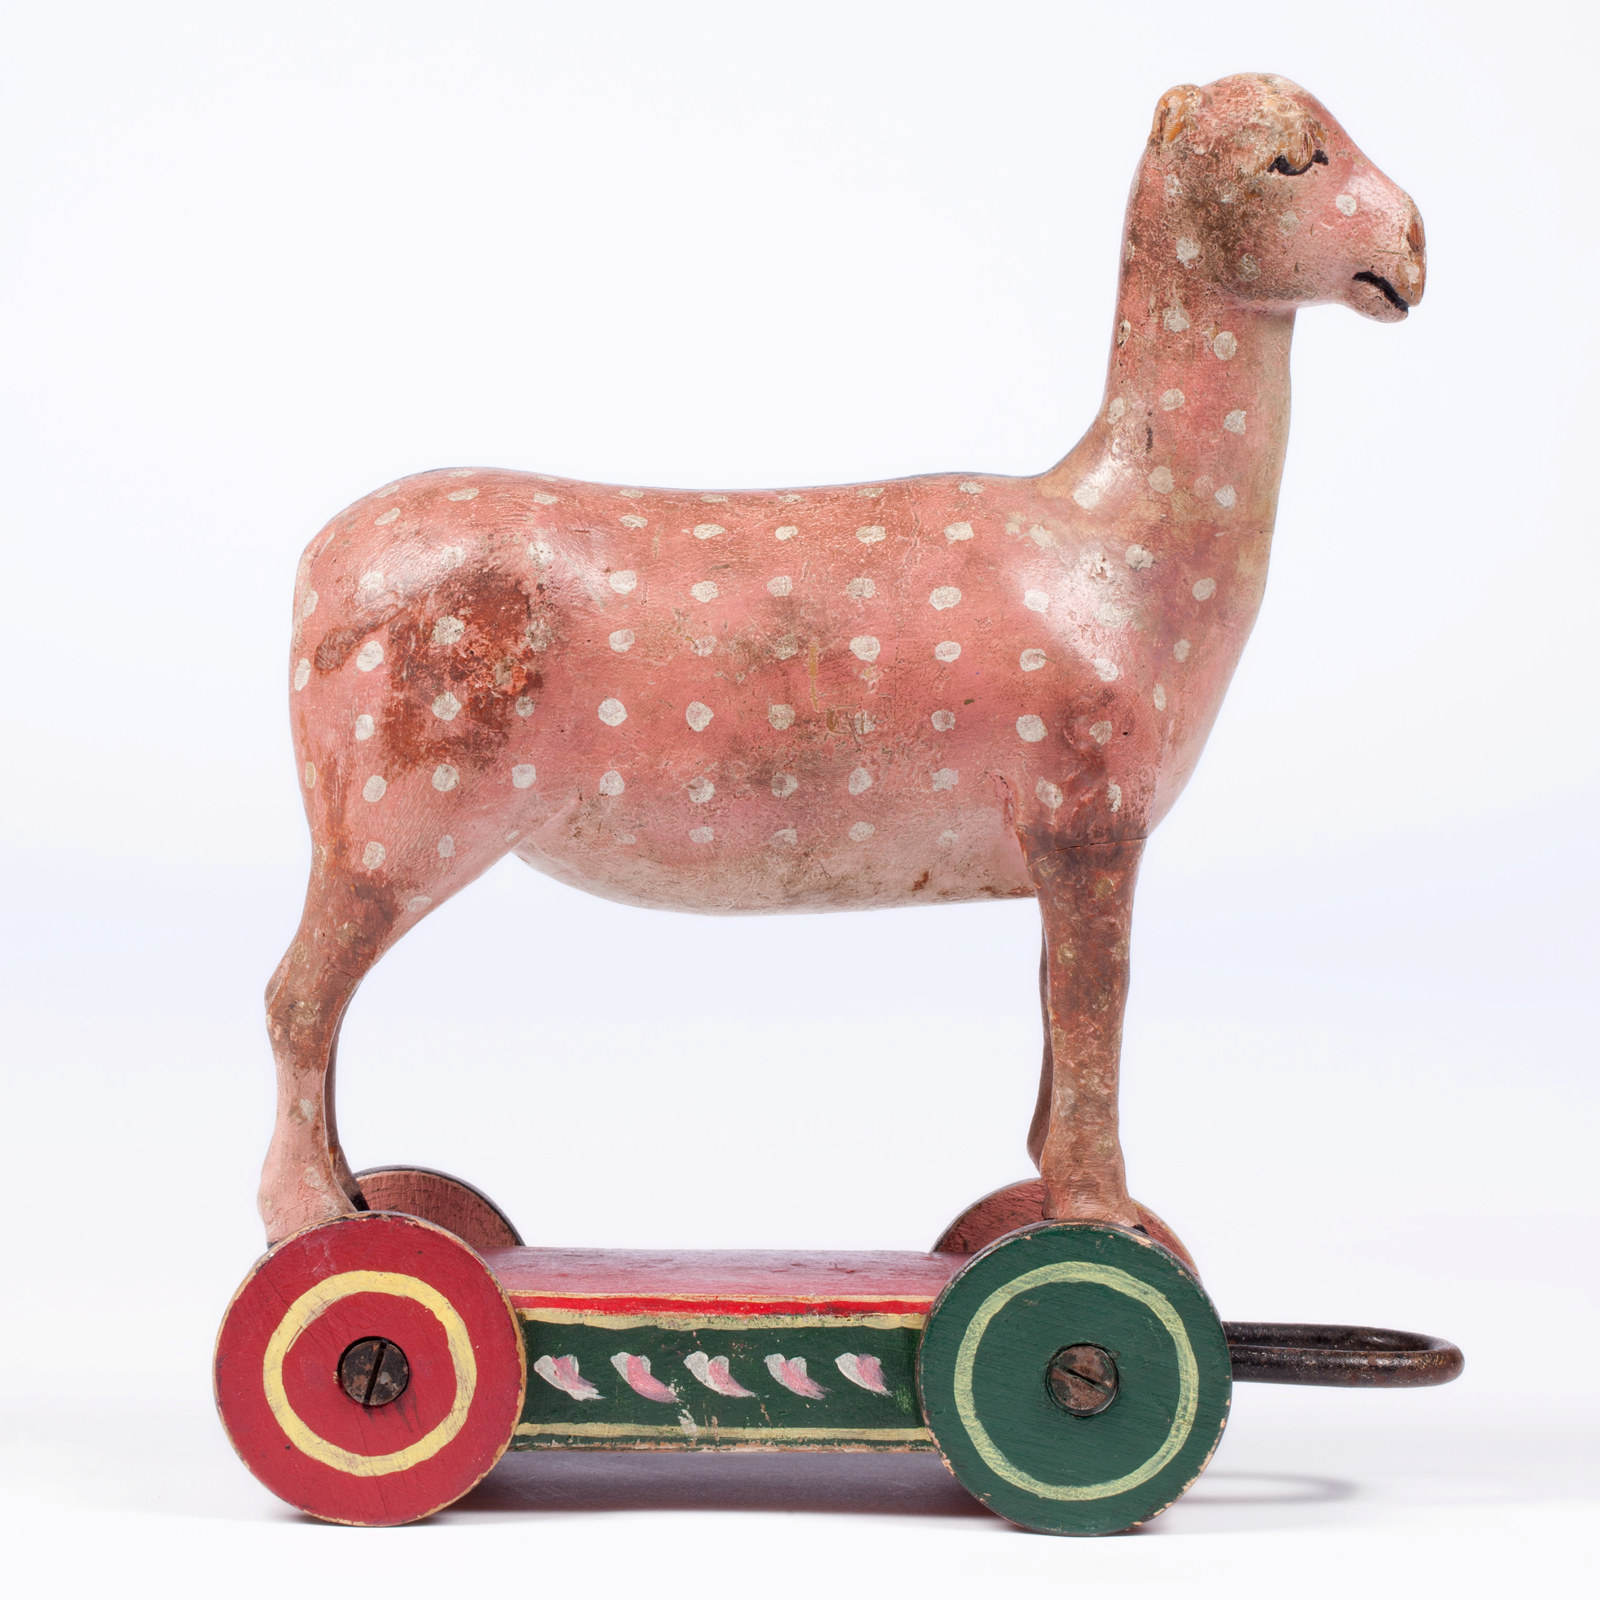 Spotted deer children's toy from India (reproduction)